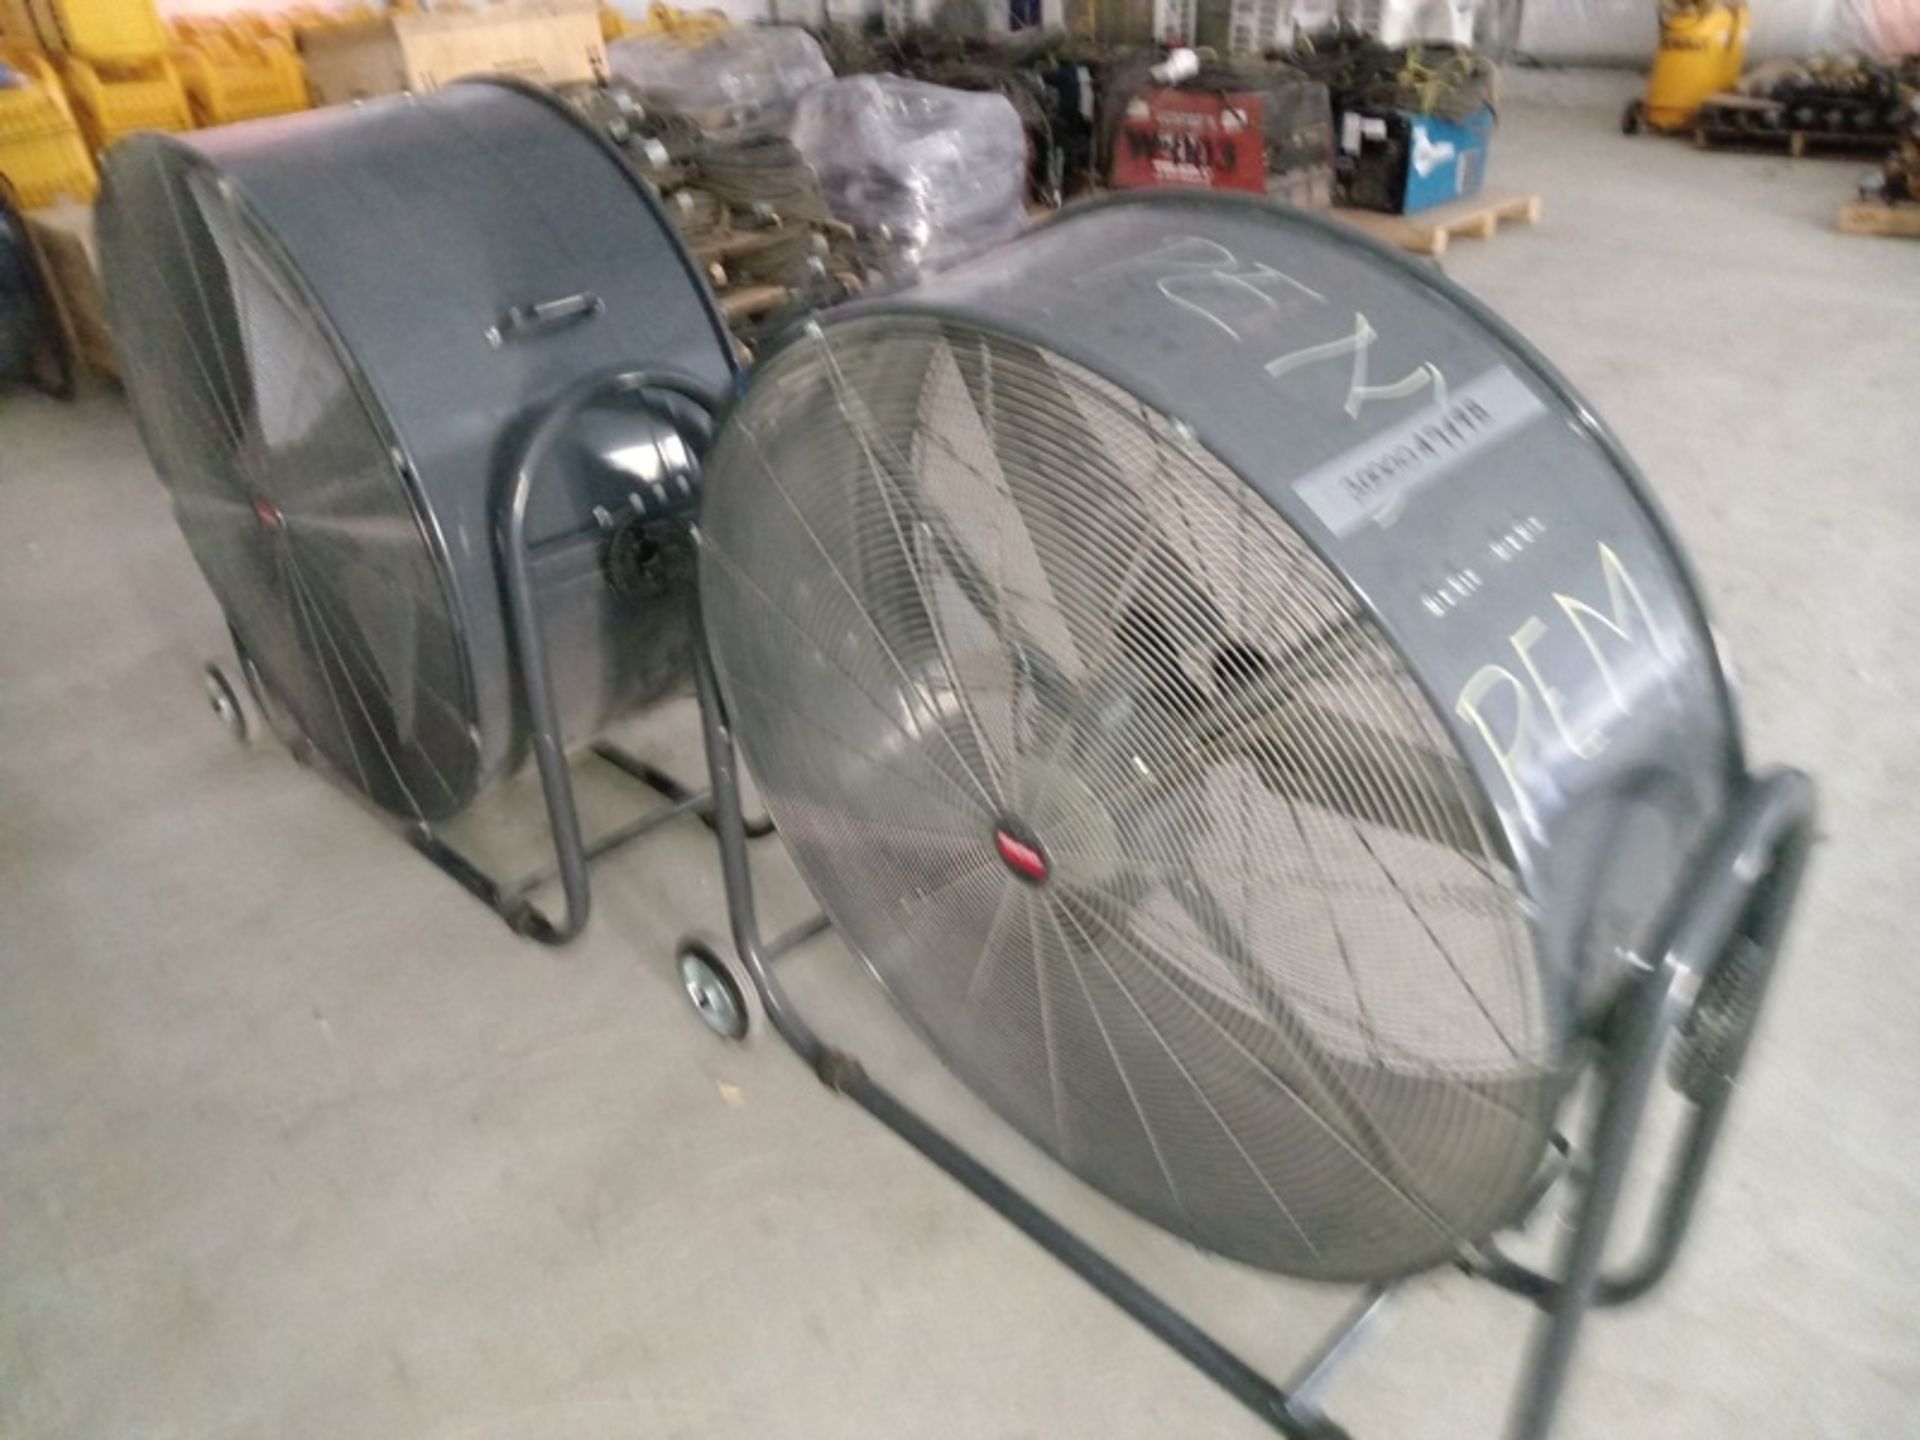 LOT OF (4) WALL MOUNTED INDUSTRIAL FANS - Image 7 of 7